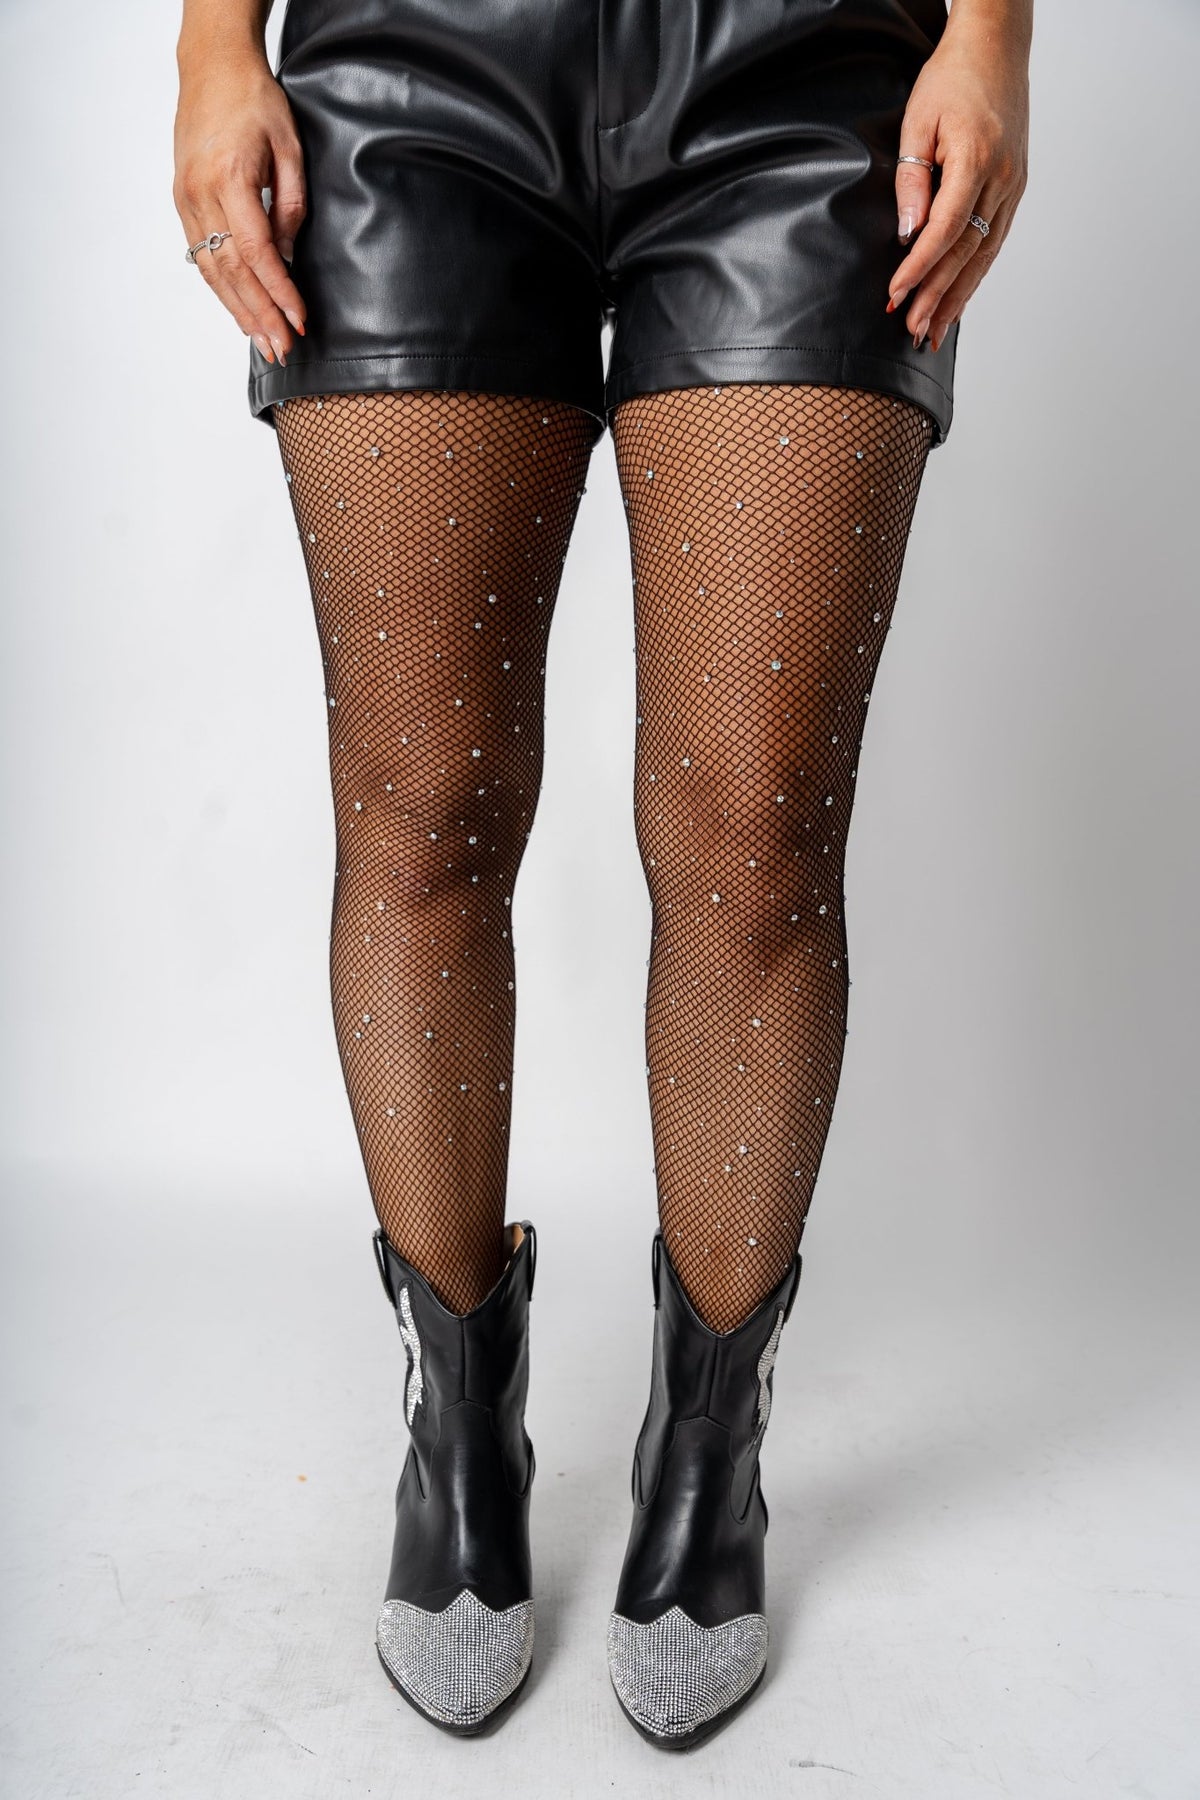 Rhinestone fishnet pantyhose black - Trendy New Year's Eve Outfits at Lush Fashion Lounge Boutique in Oklahoma City